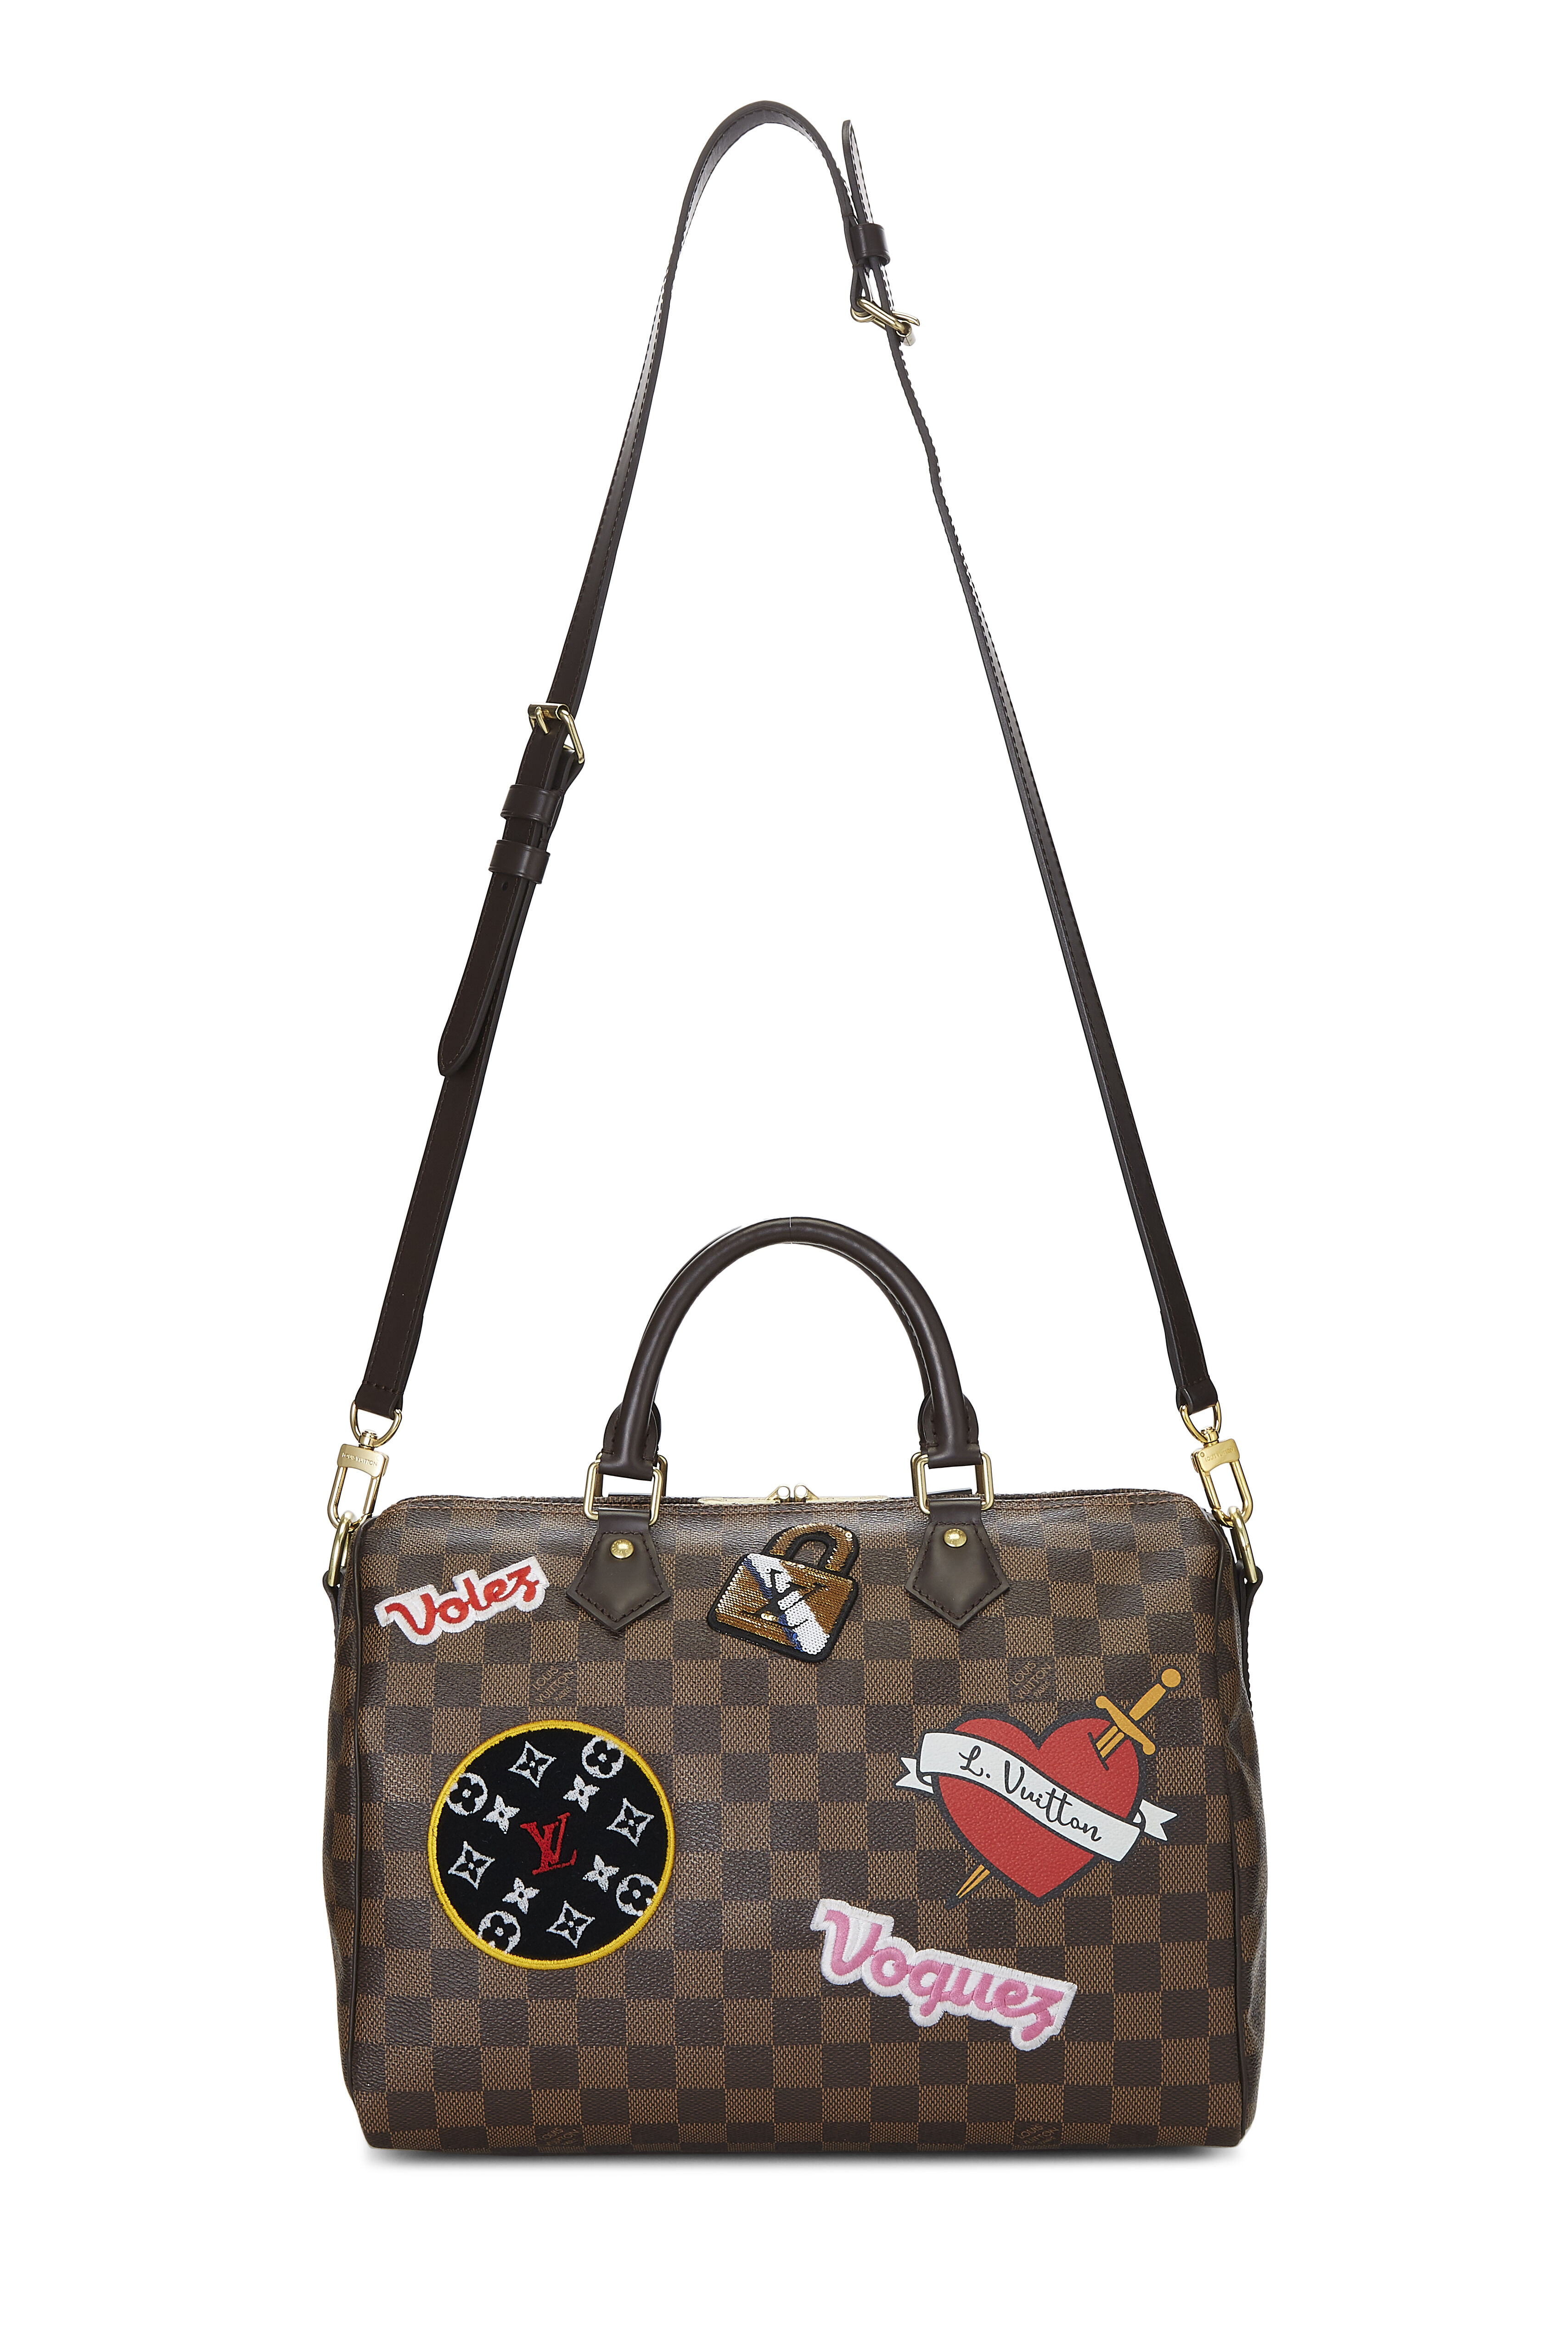 Speedy Bandouliere Patches Limited Edition 30 Shoulder bag in Monogram  coated canvas, Gold Hardware